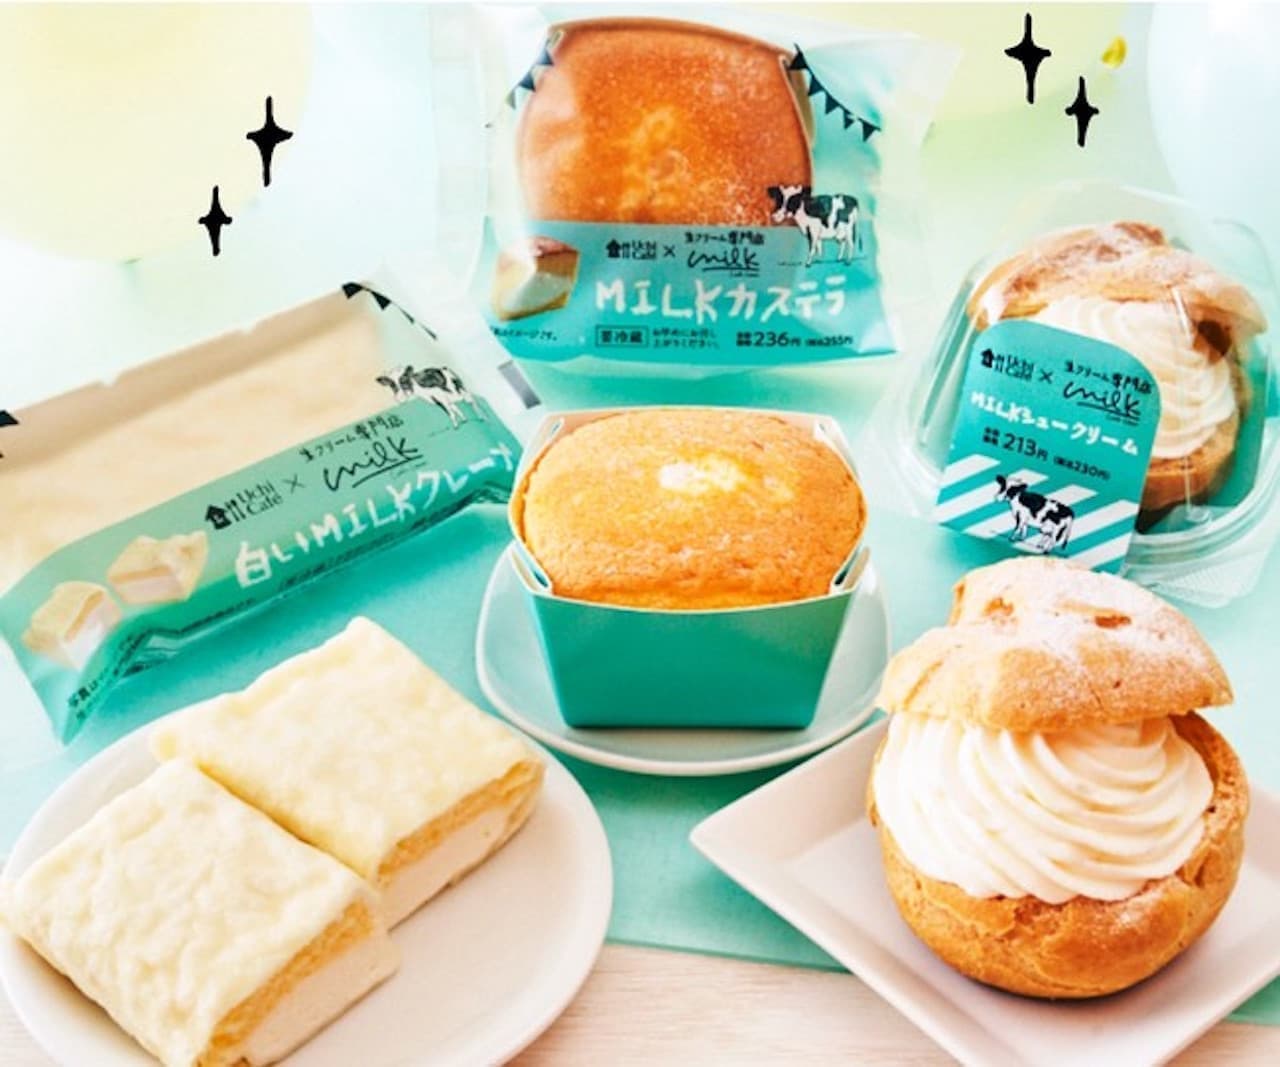 "Lawson x fresh cream specialty store MILK" 2nd collaboration sweets